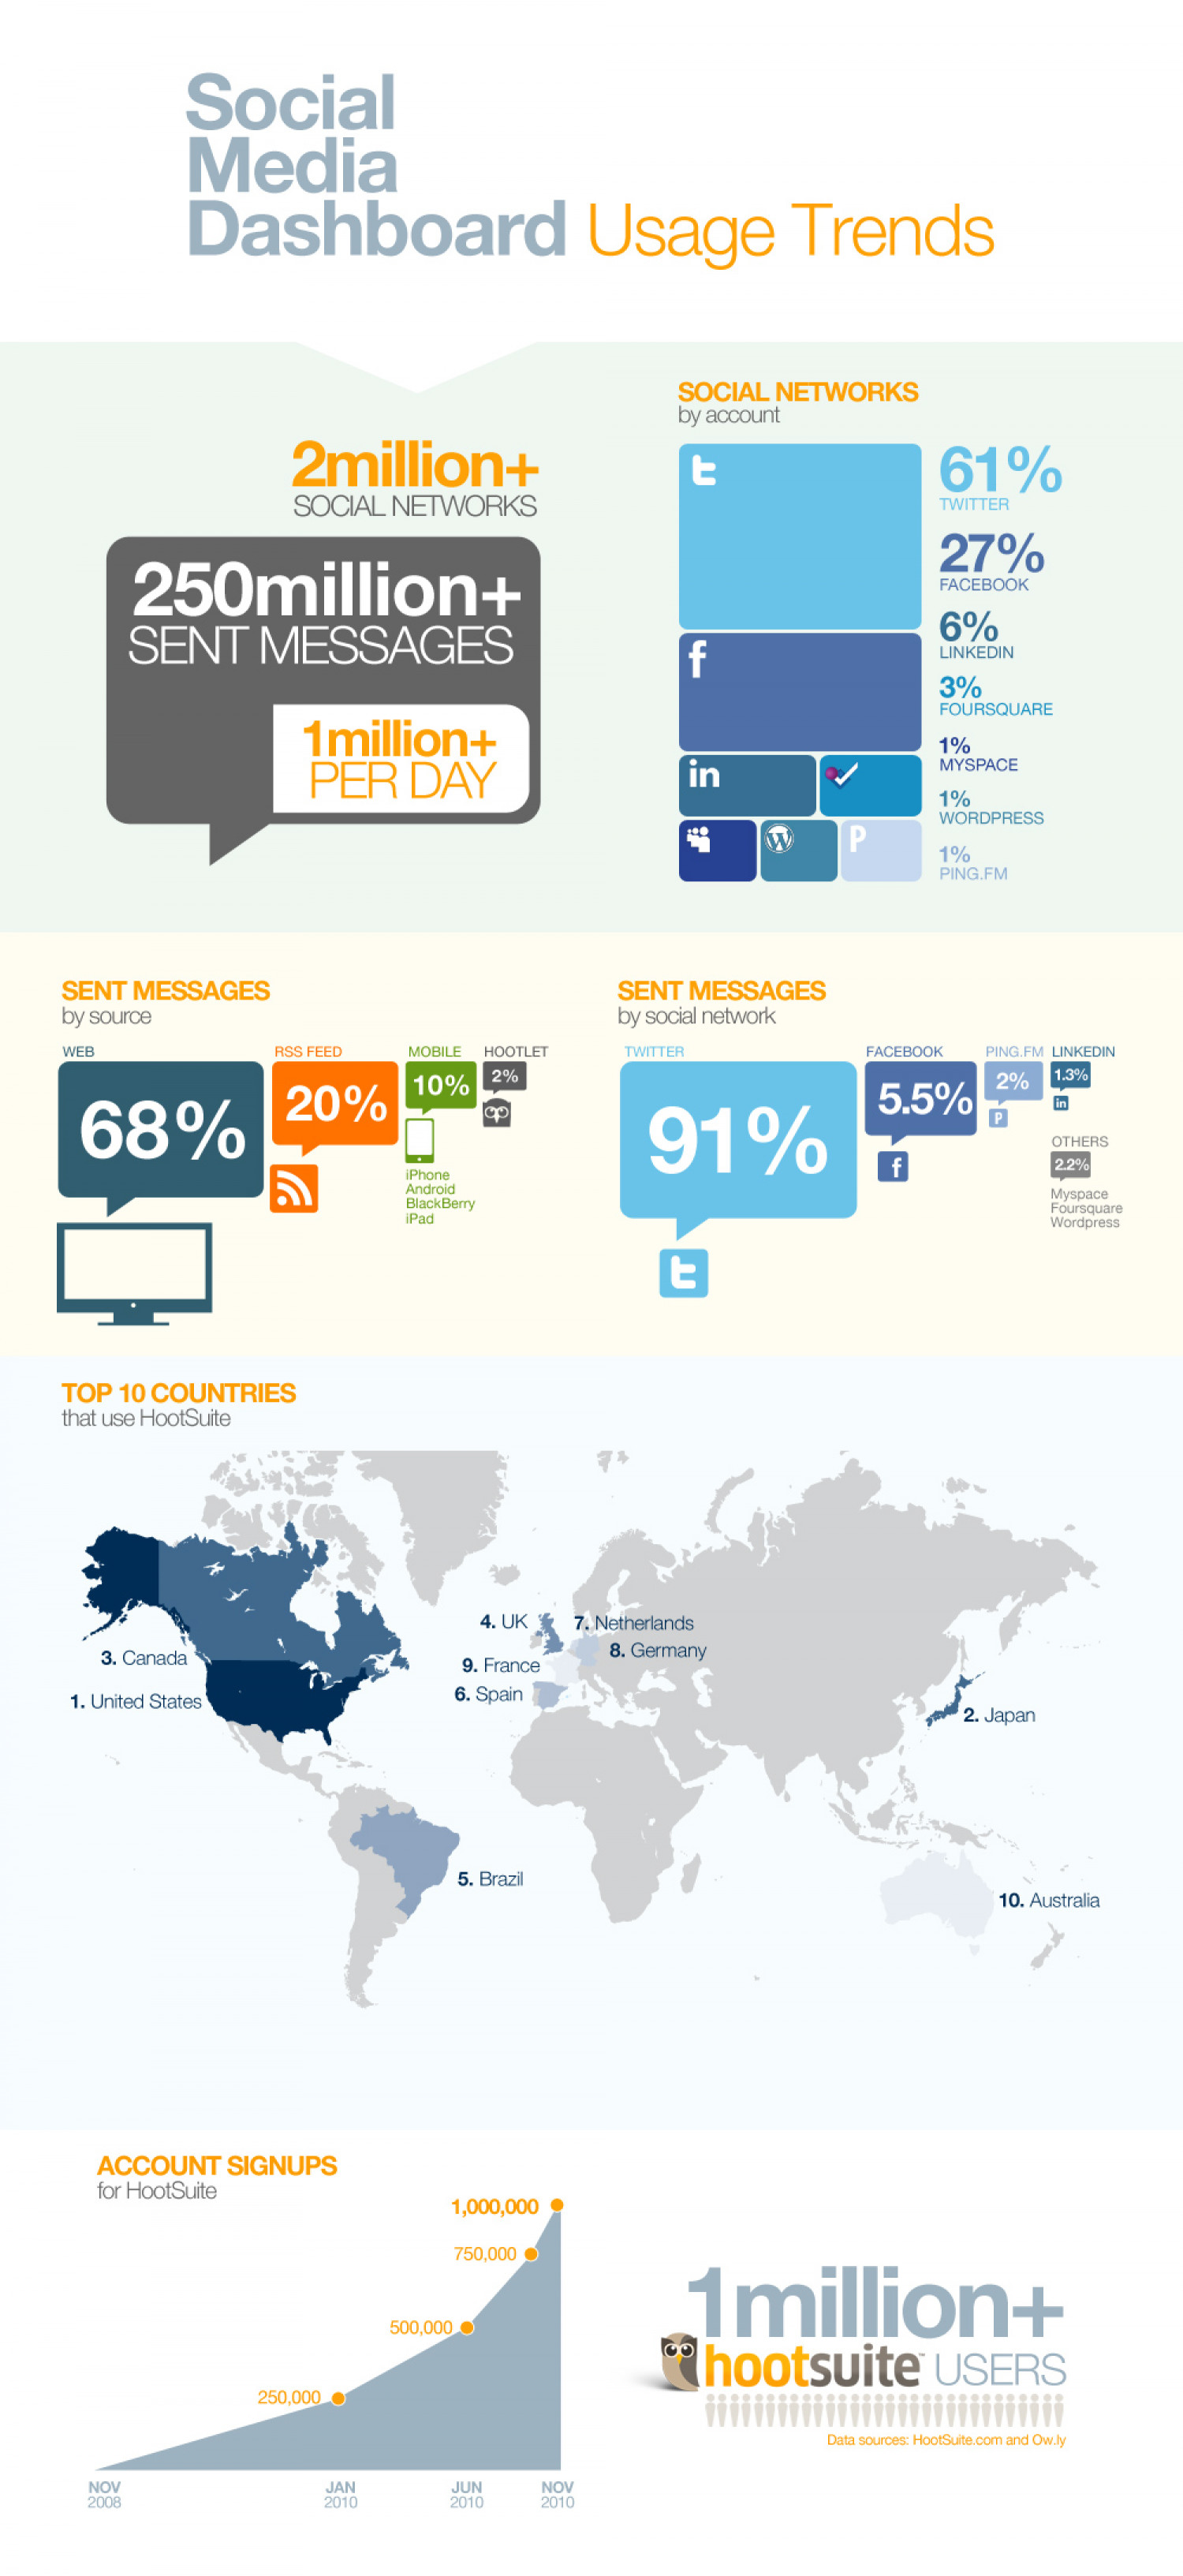 Social Media Dashboard Usage Trends Infographic